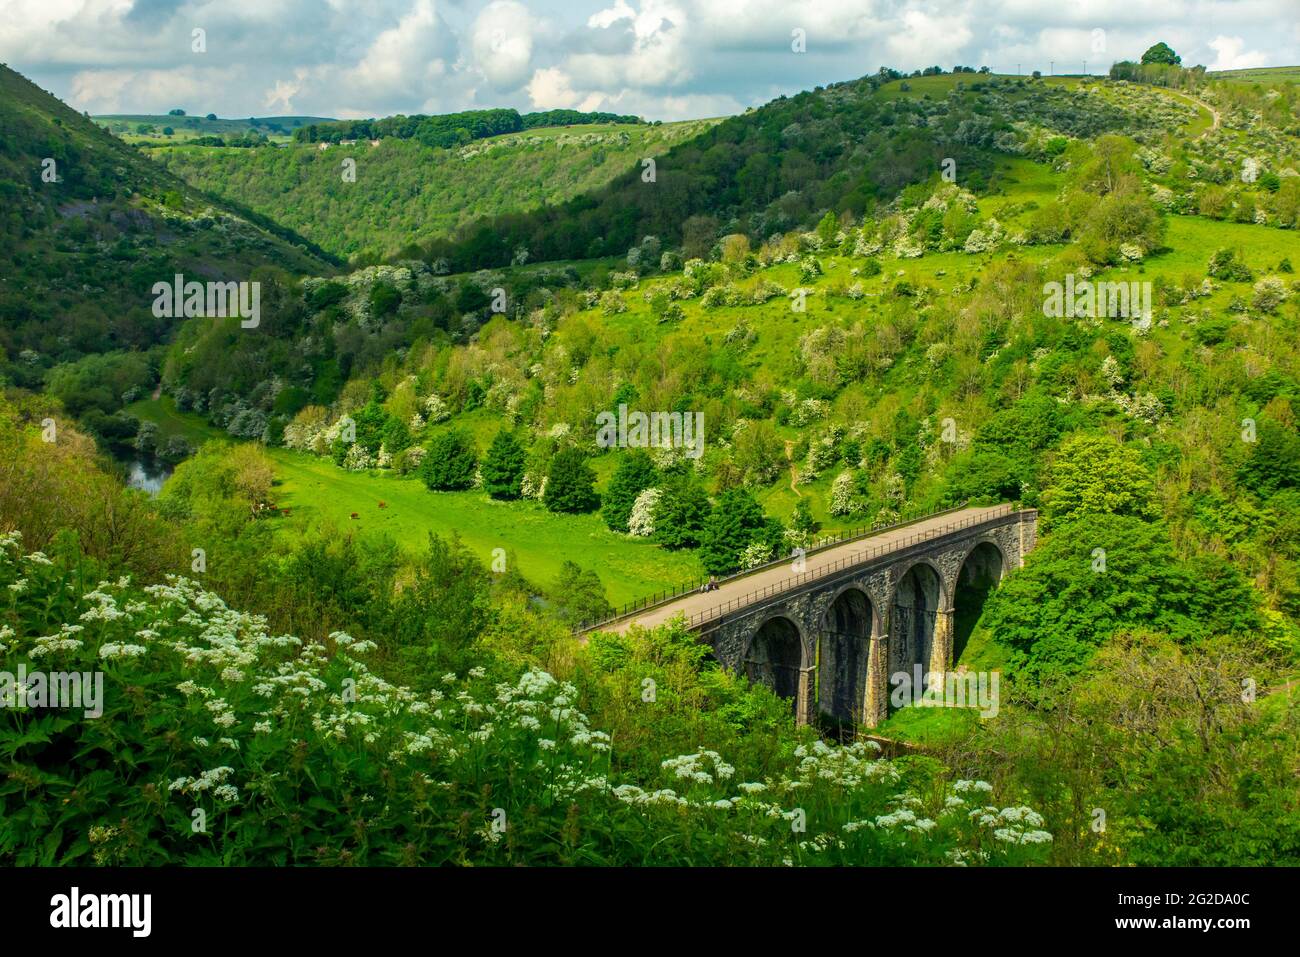 Early summer at Monsal Head a popular viewpoint in the Peak District National Park Derbyshire England UK with Monsal Viaduct in foreground. Stock Photo